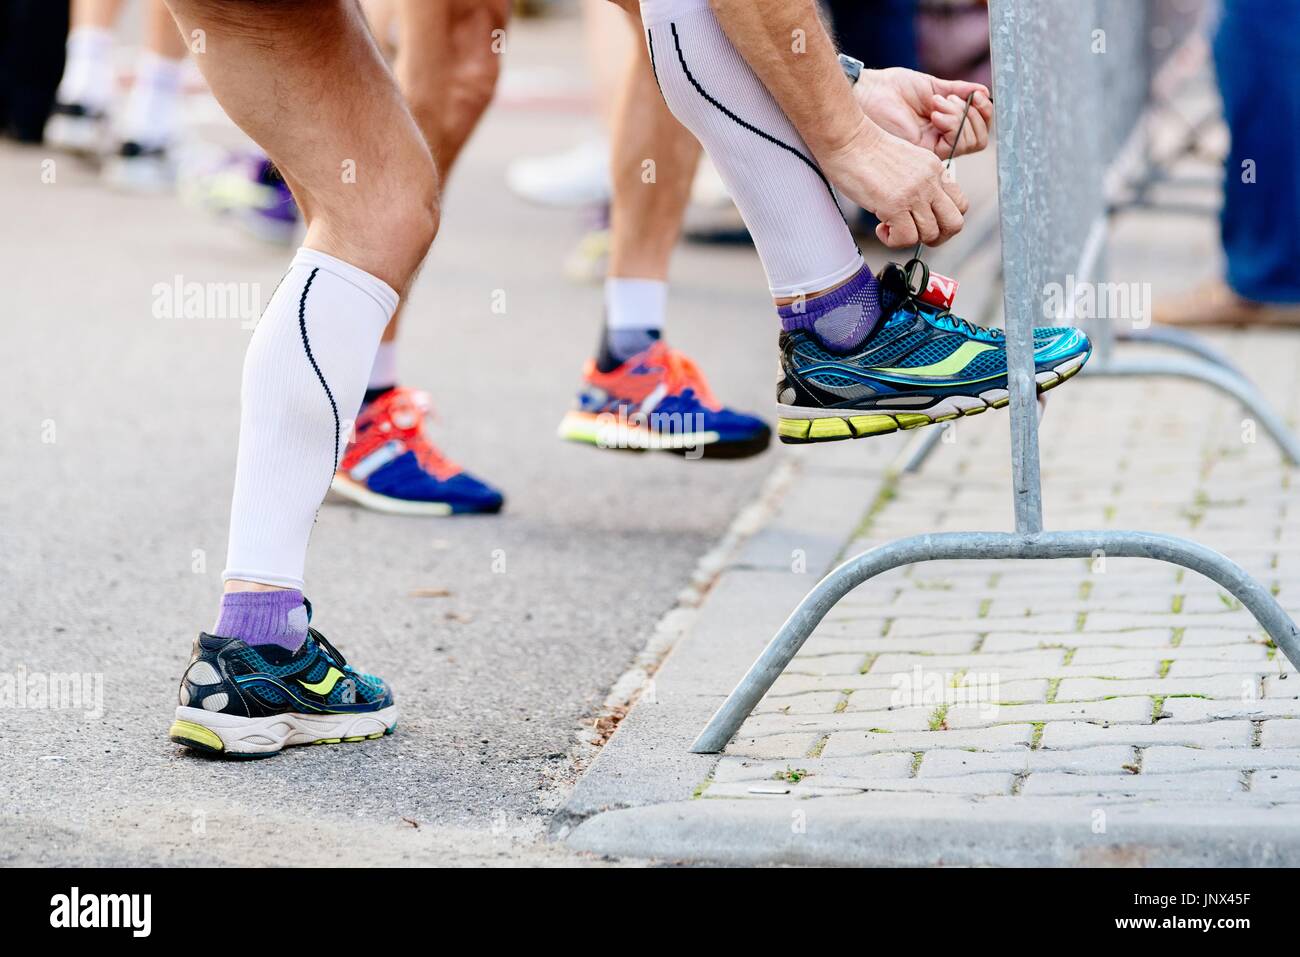 Man ties his sport running shoe before the race. Preparation of sportsman Stock Photo